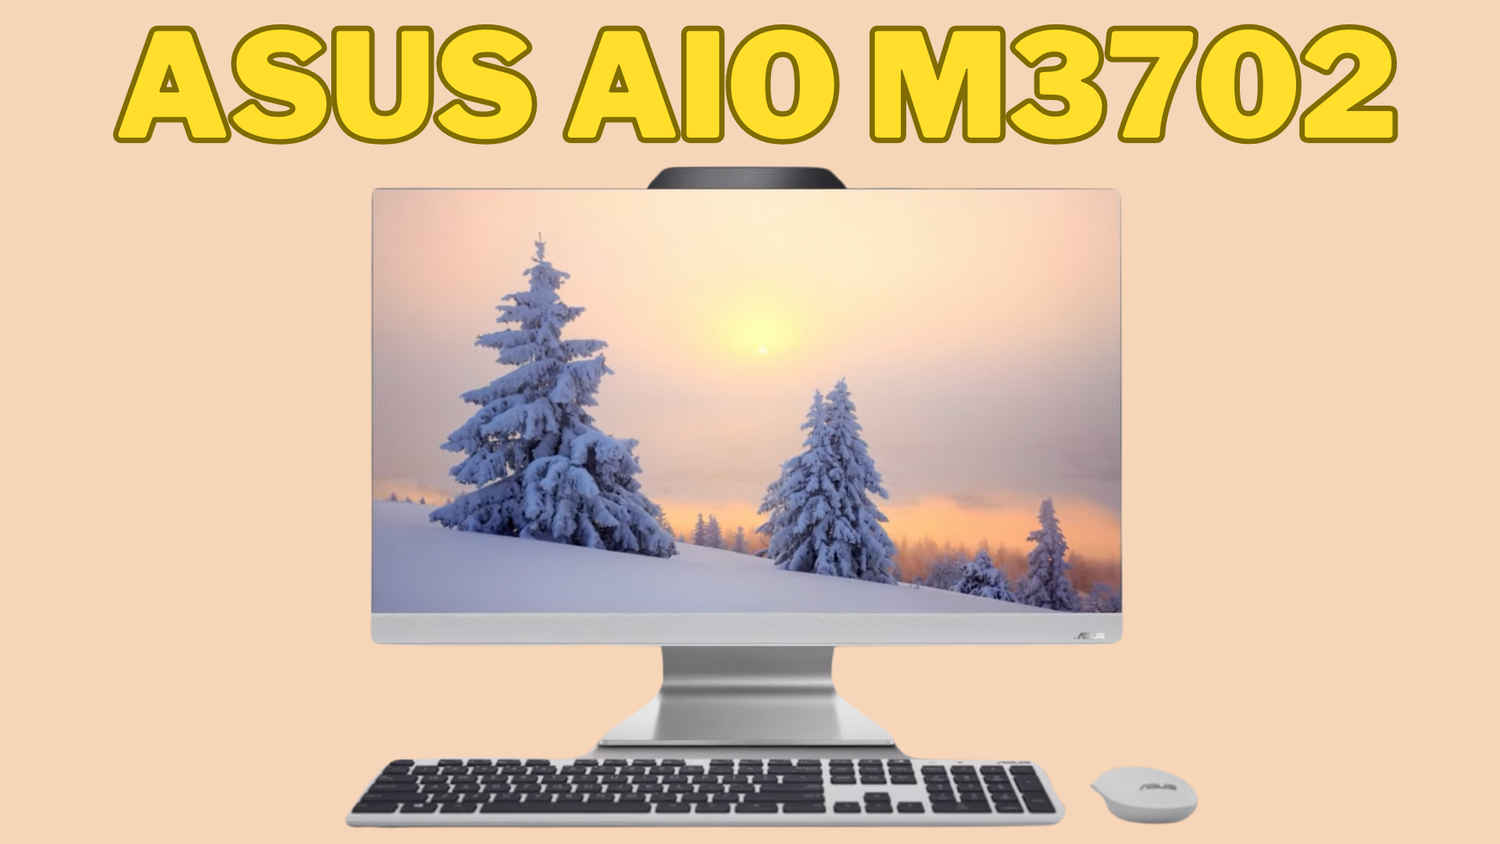 Asus AIO M3702 PC launched in India: Price, specifications, and more